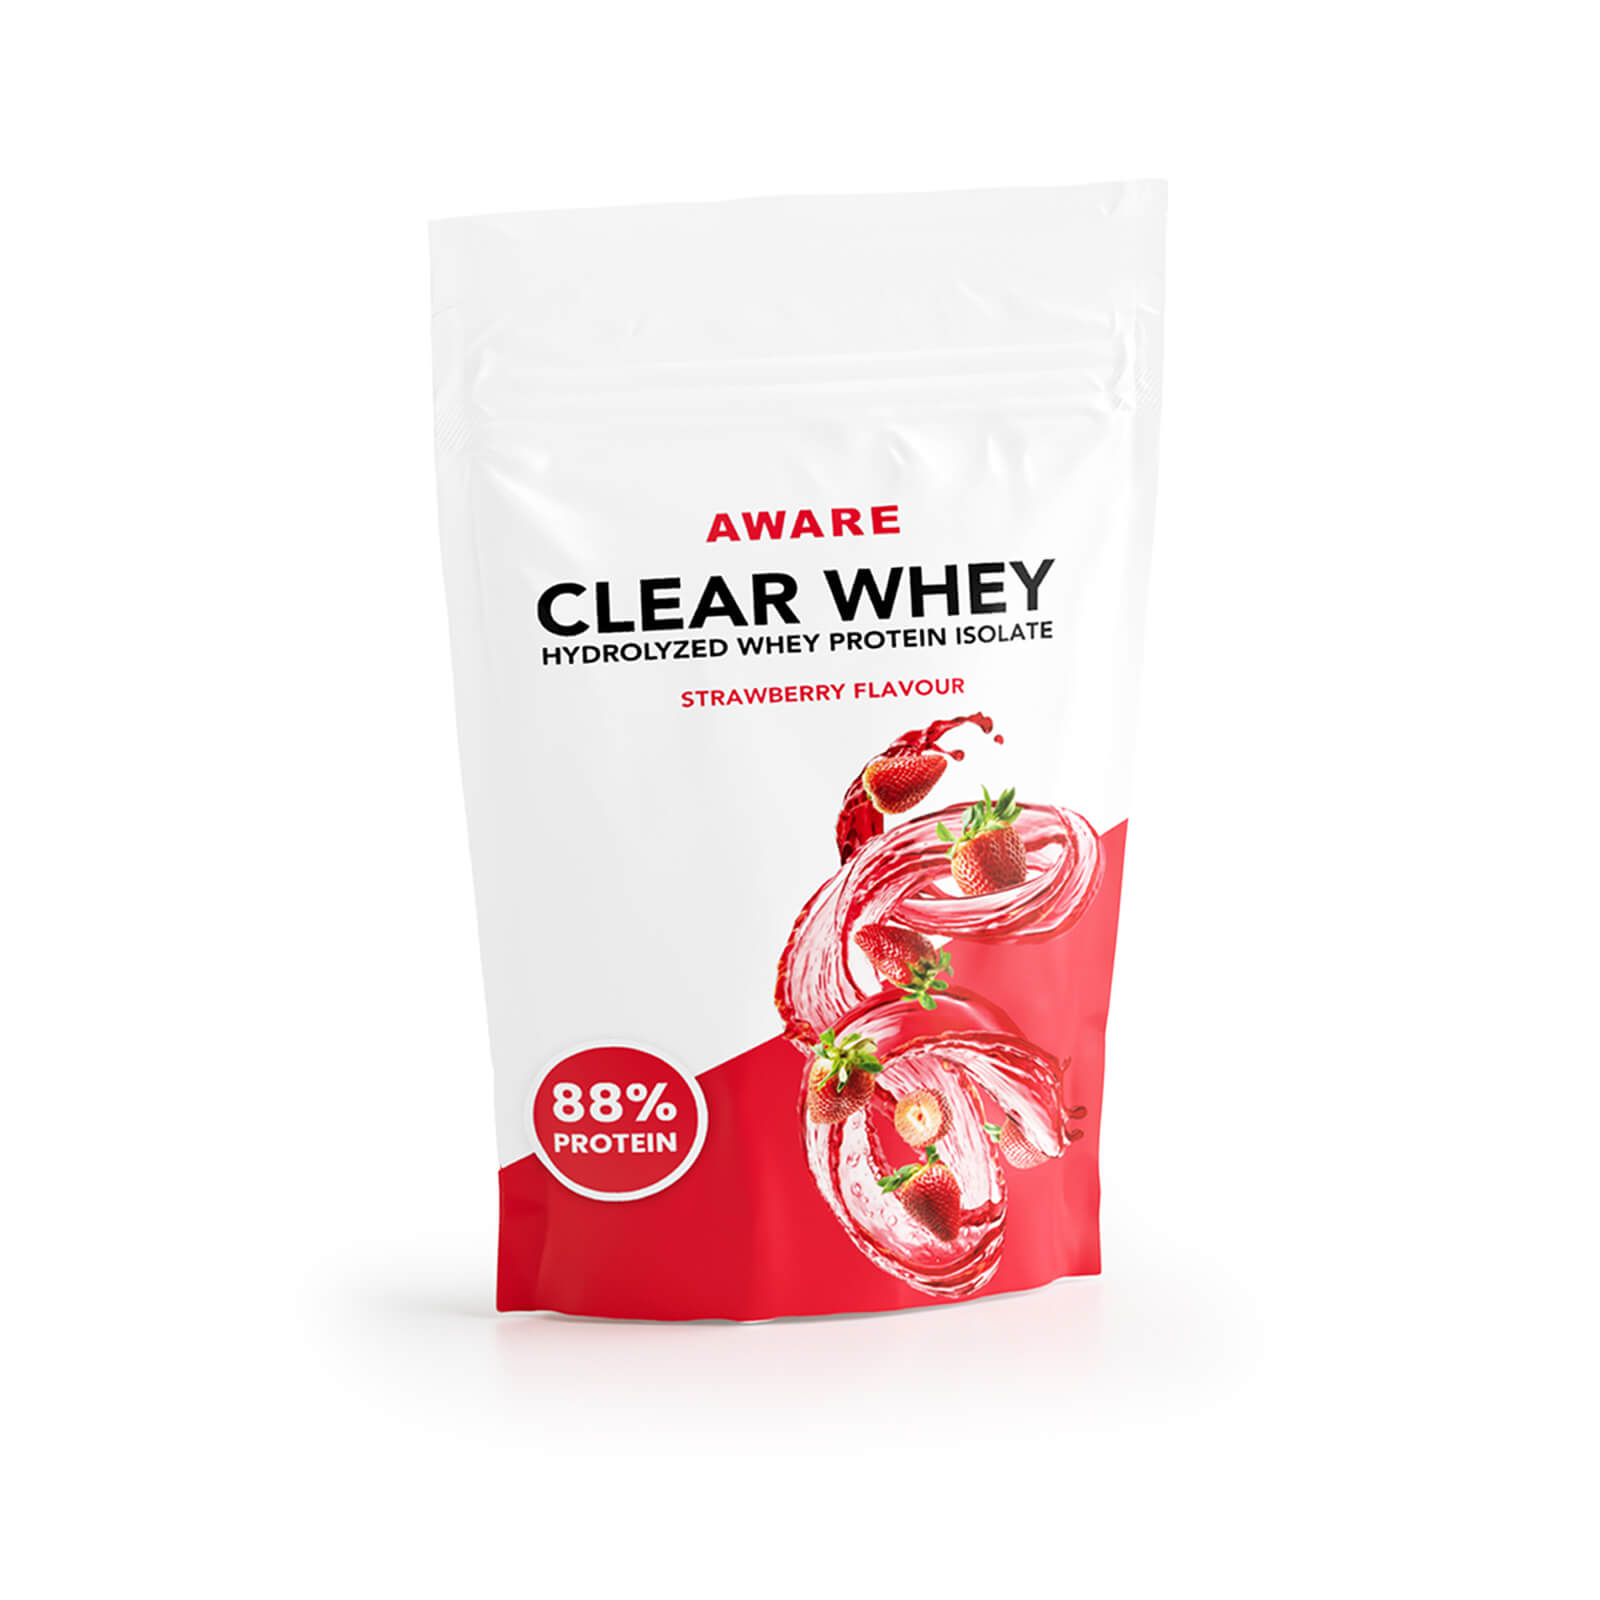 Clear Whey, 500 g, Aware Nutrition